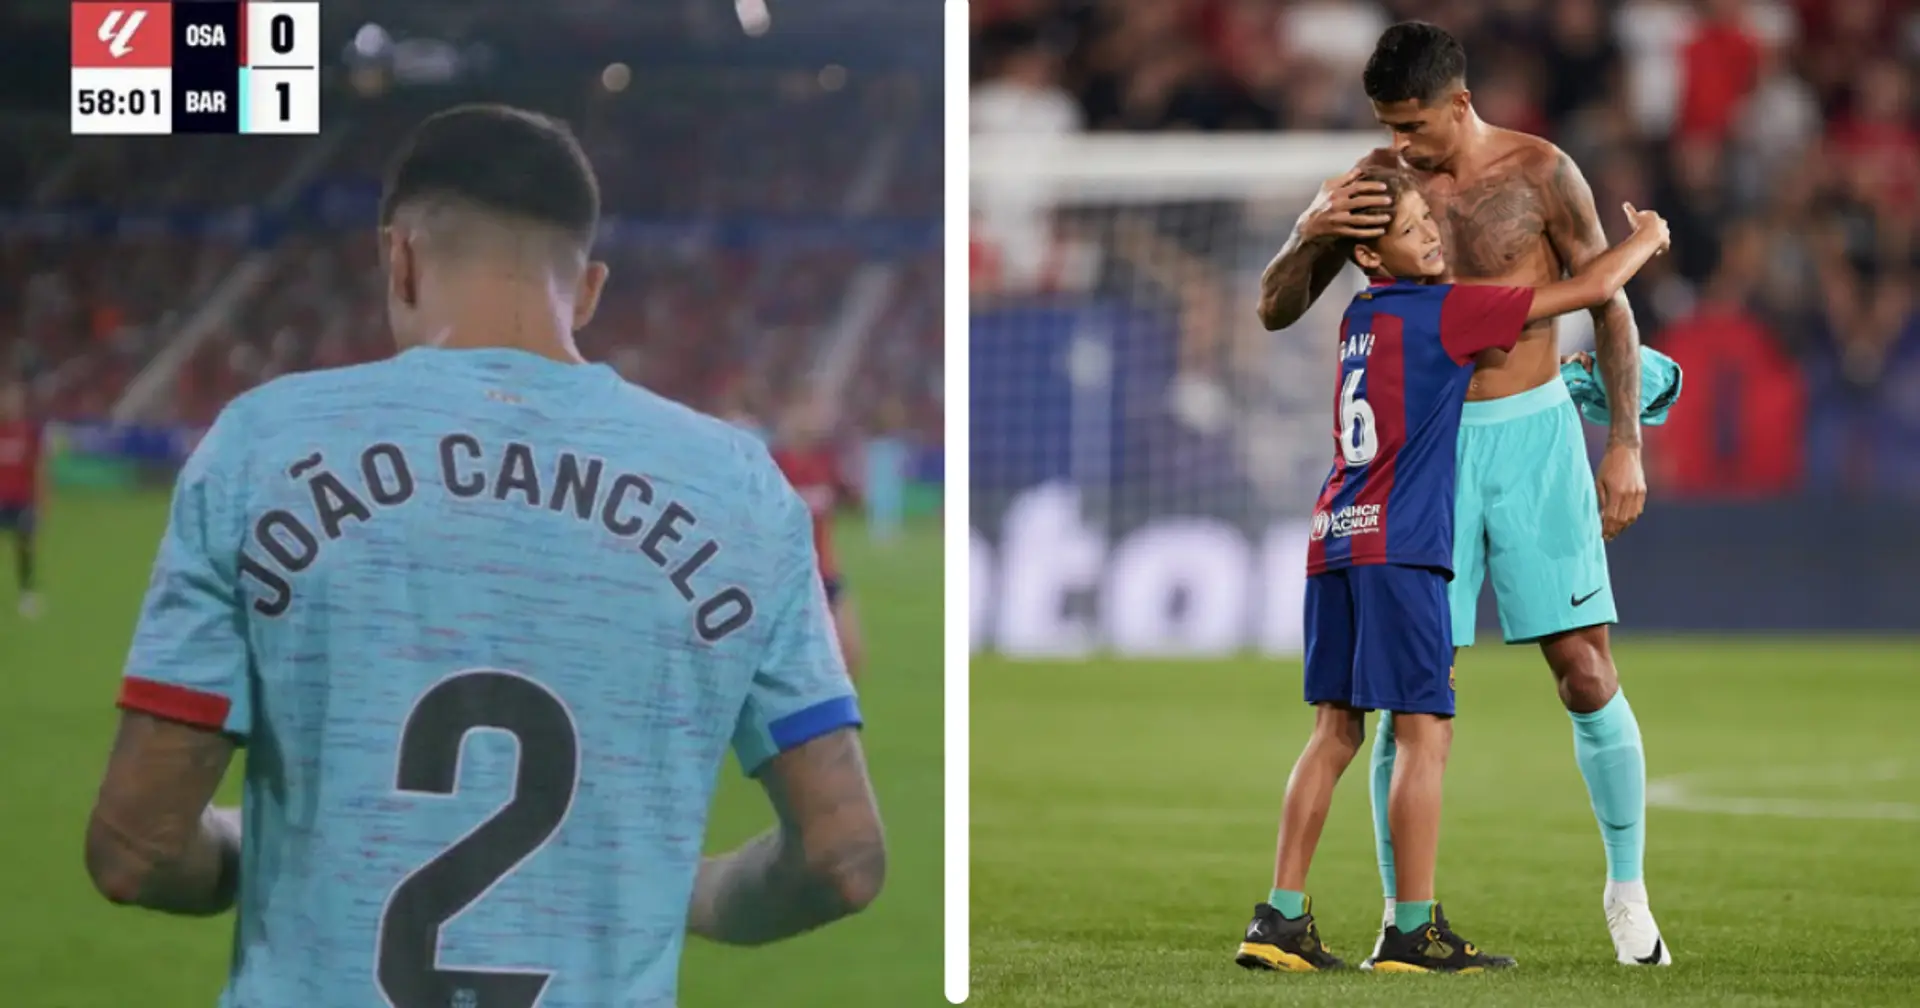 Joao Cancelo's incredible gesture for pitch invader caught on camera